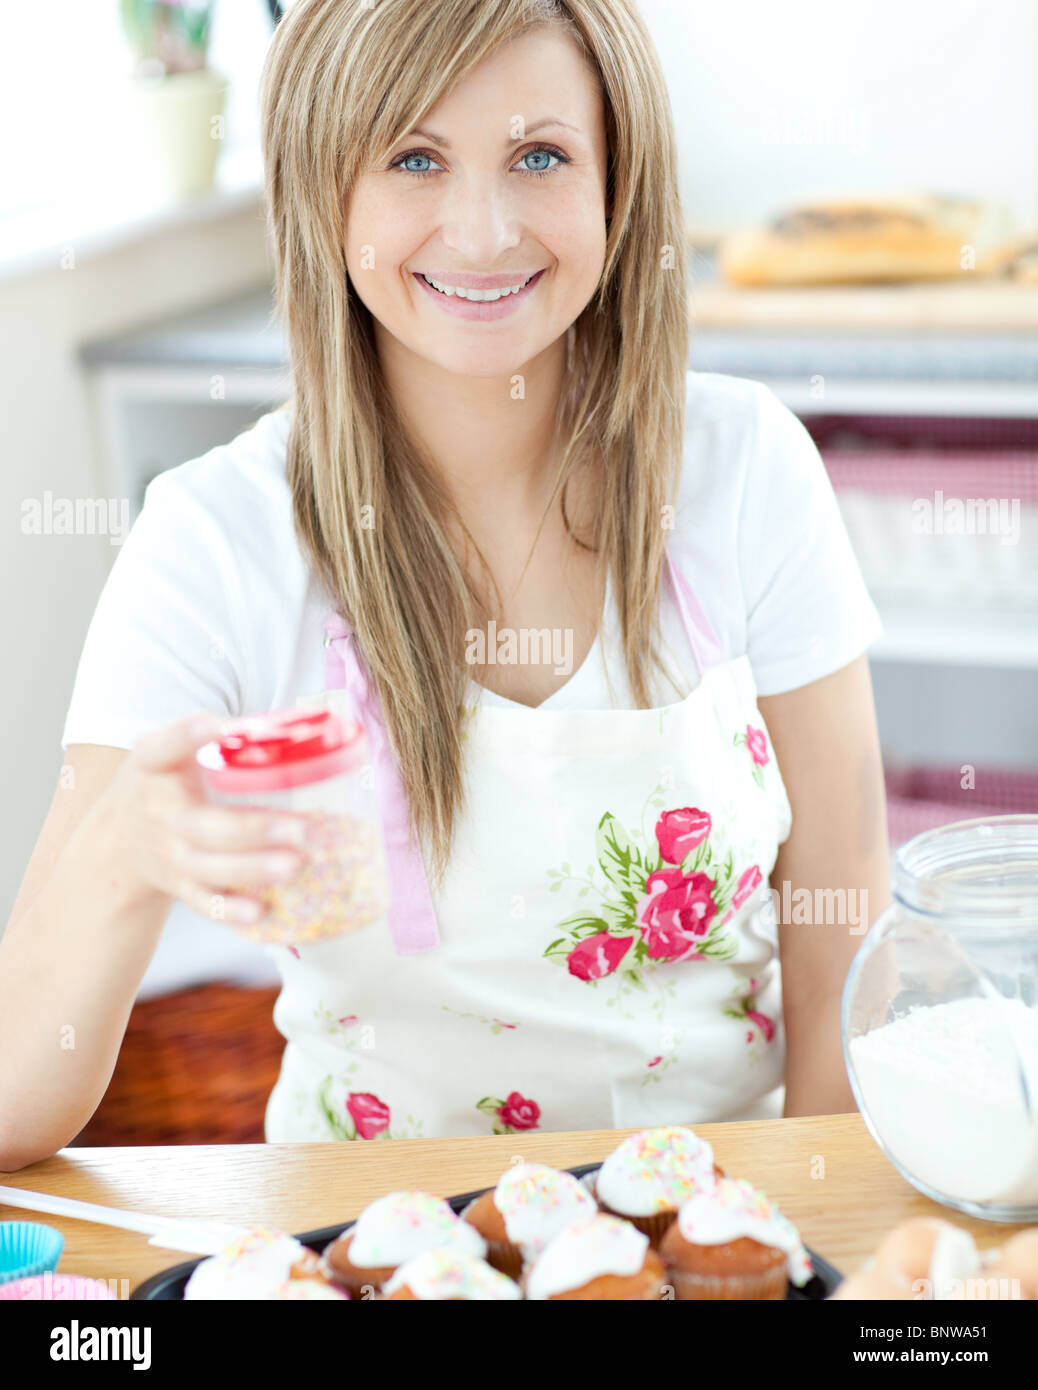 Attractive woman showing cakes in the kitchen Stock Photo